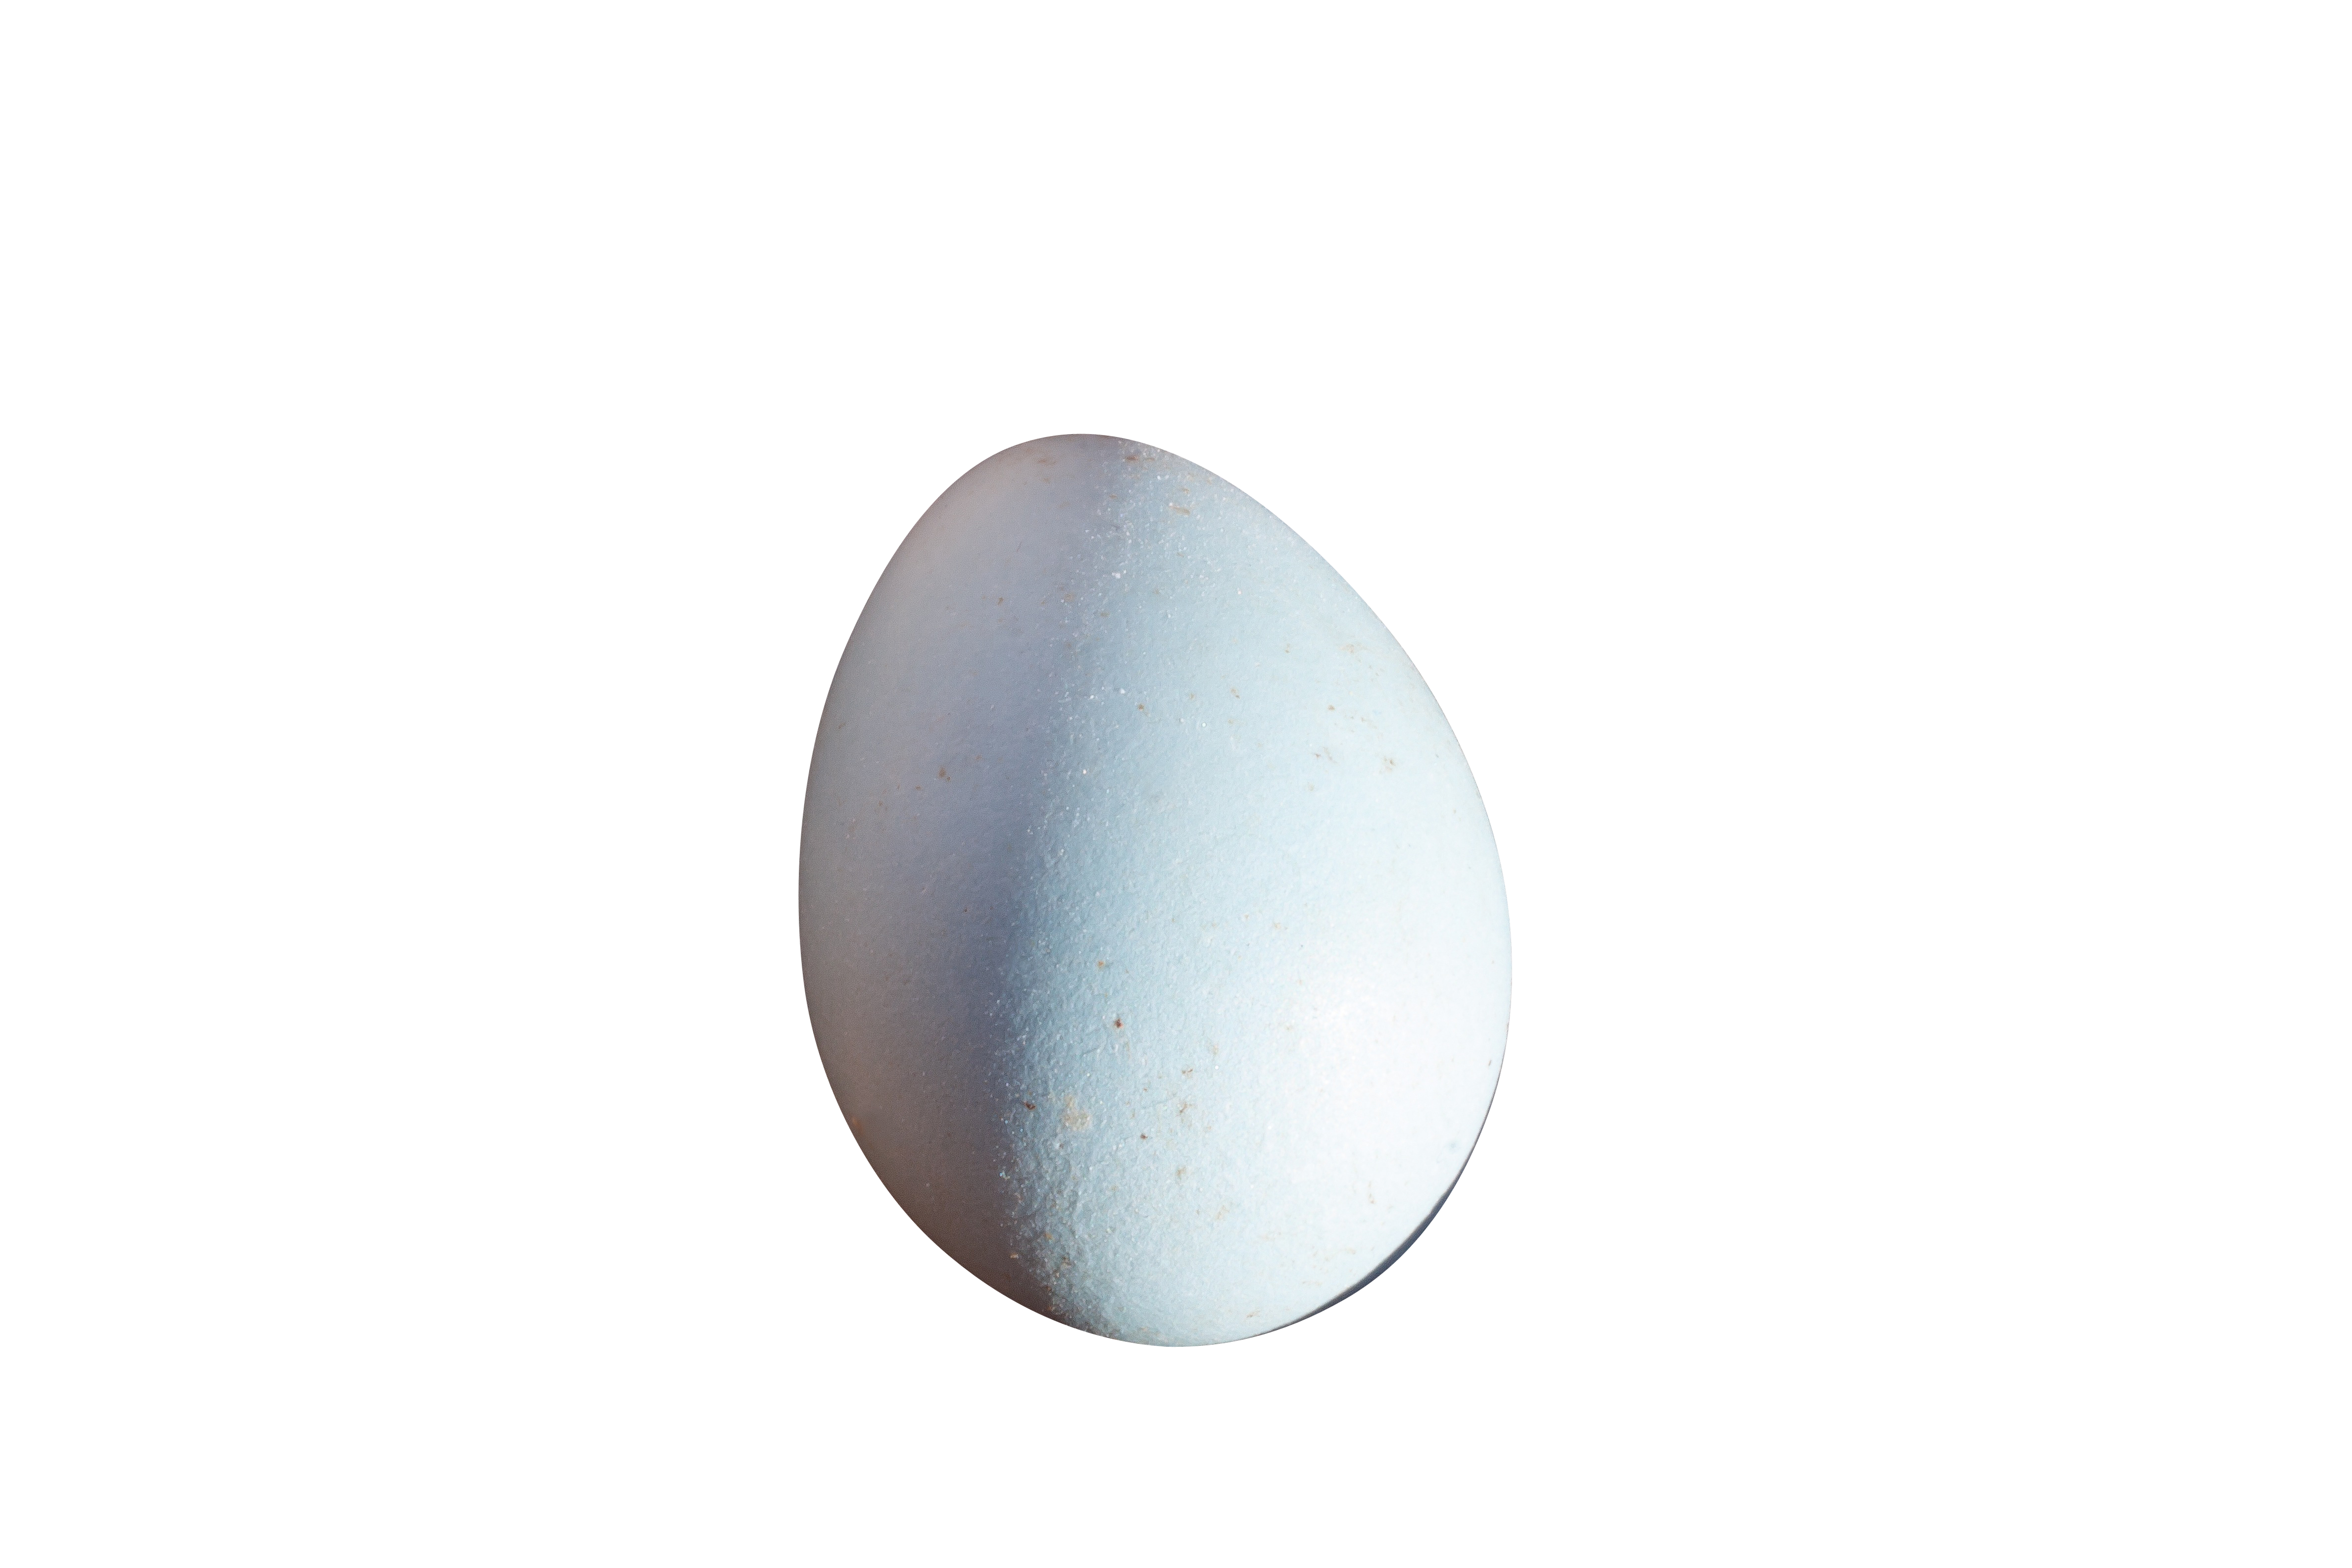 A White Egg On A Black Background